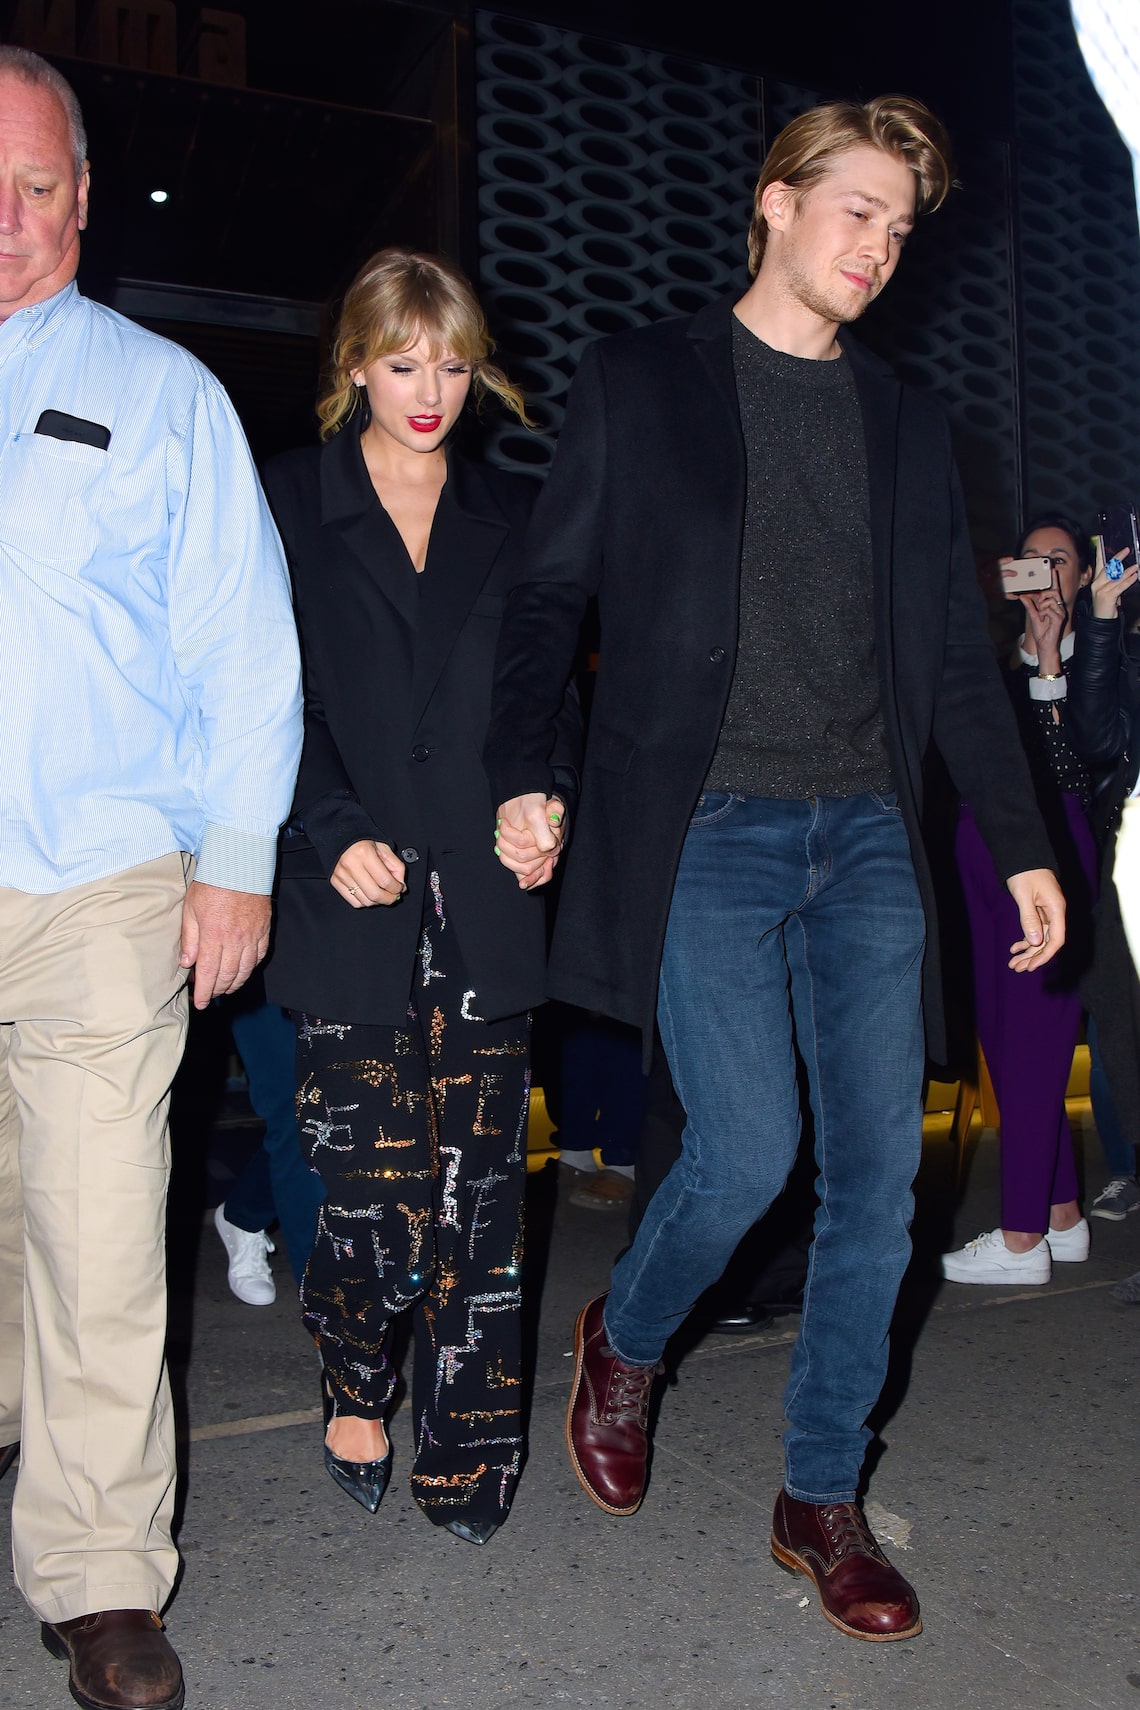 Joe Alwyn's Rare Comment About His Relationship with Taylor Swift